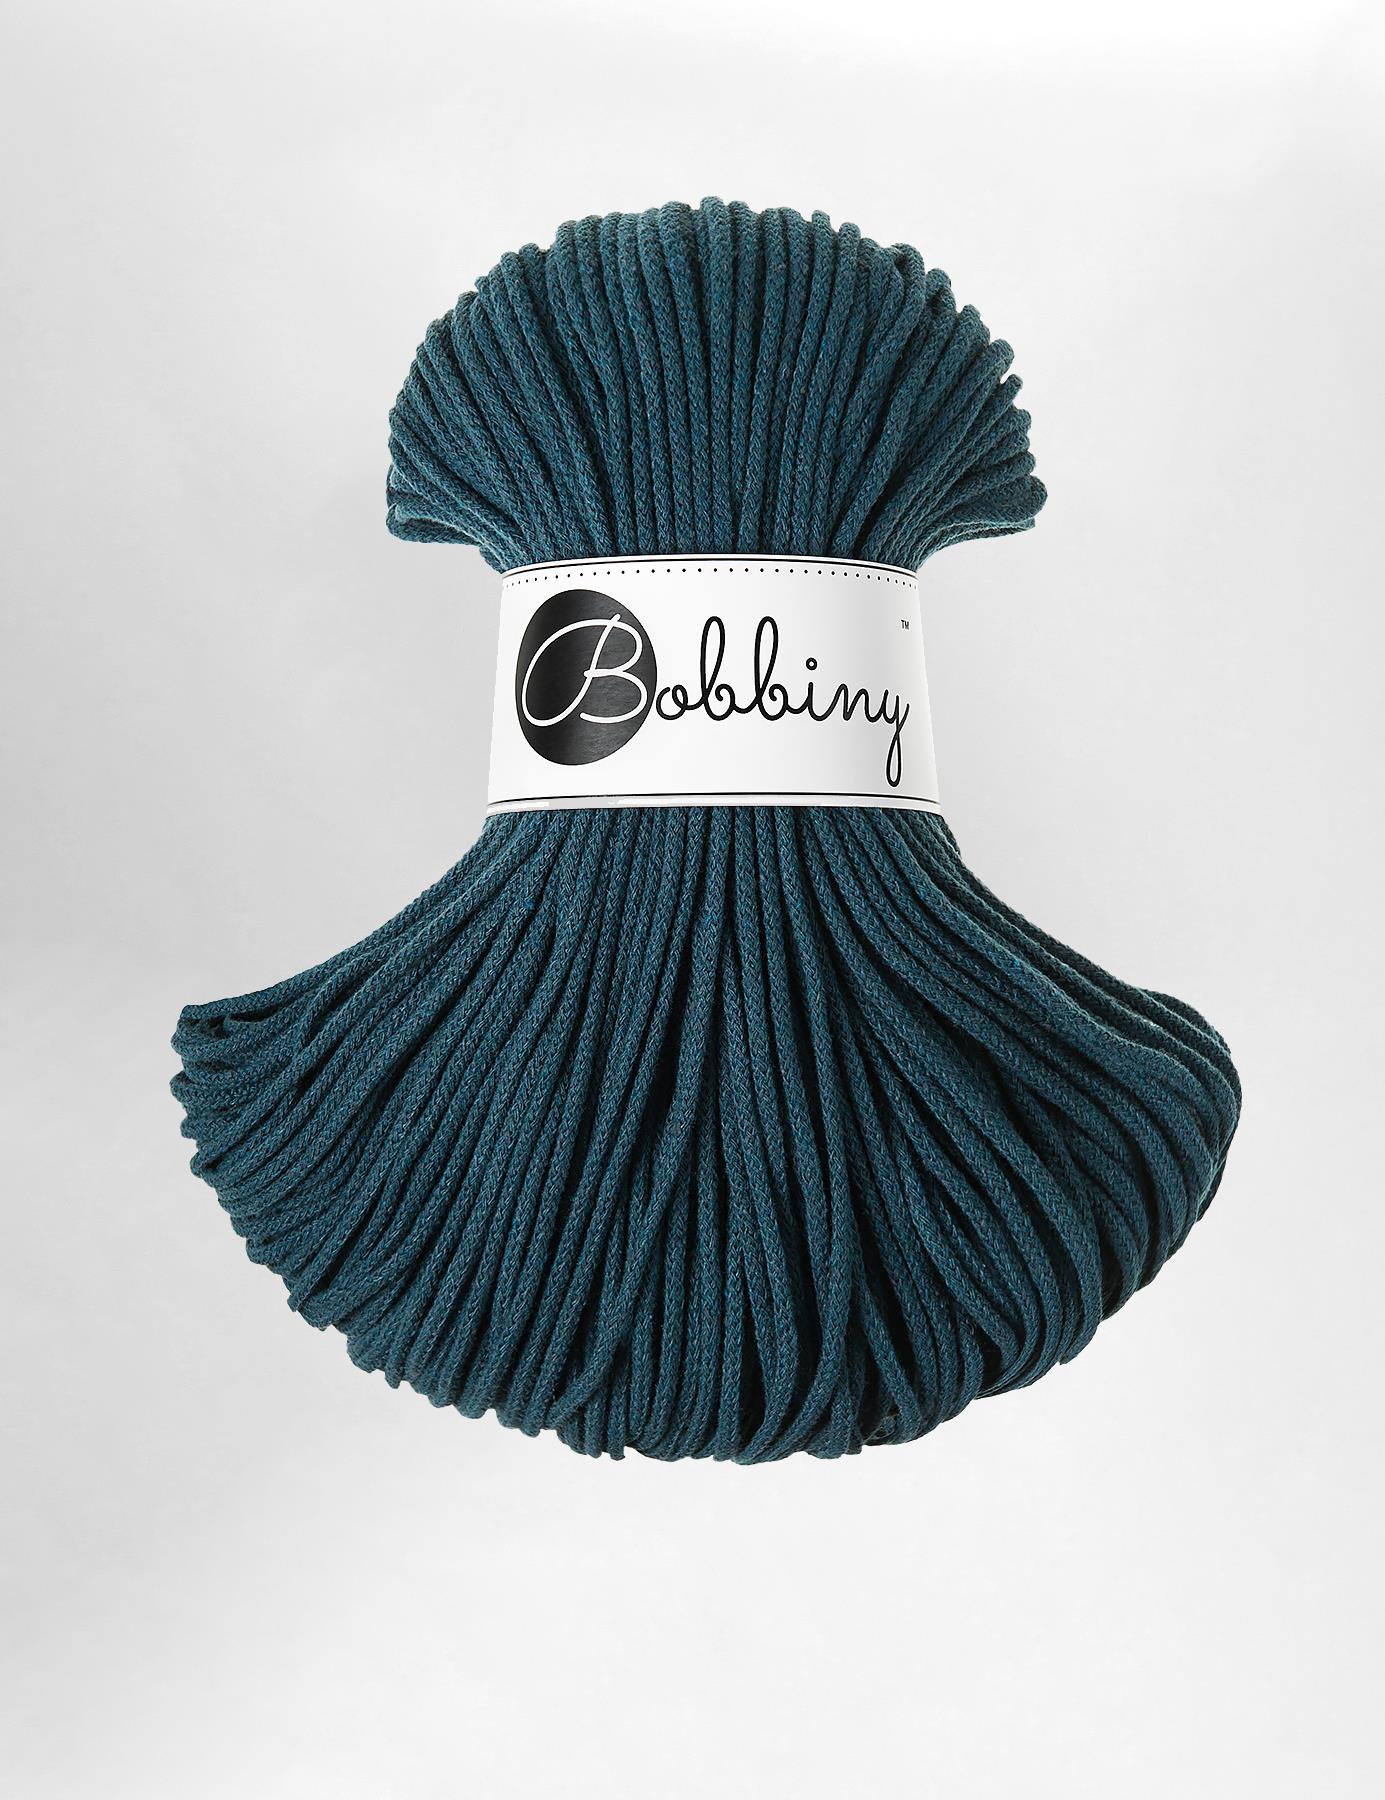 3mm Peacock blue recycled cotton macrame cord by Bobbiny (100m)